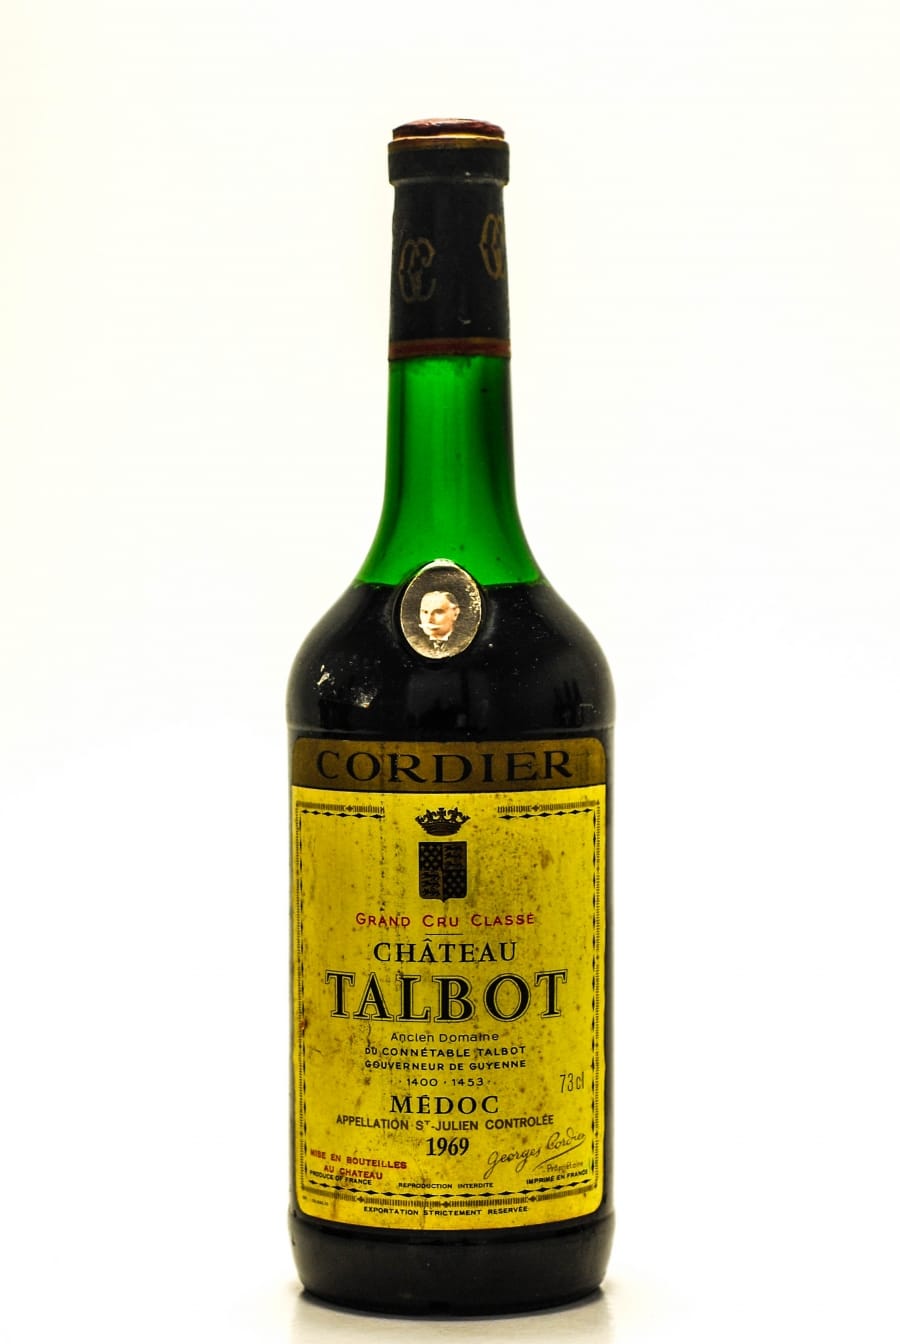 Chateau Talbot - Chateau Talbot 1969 Nederlands